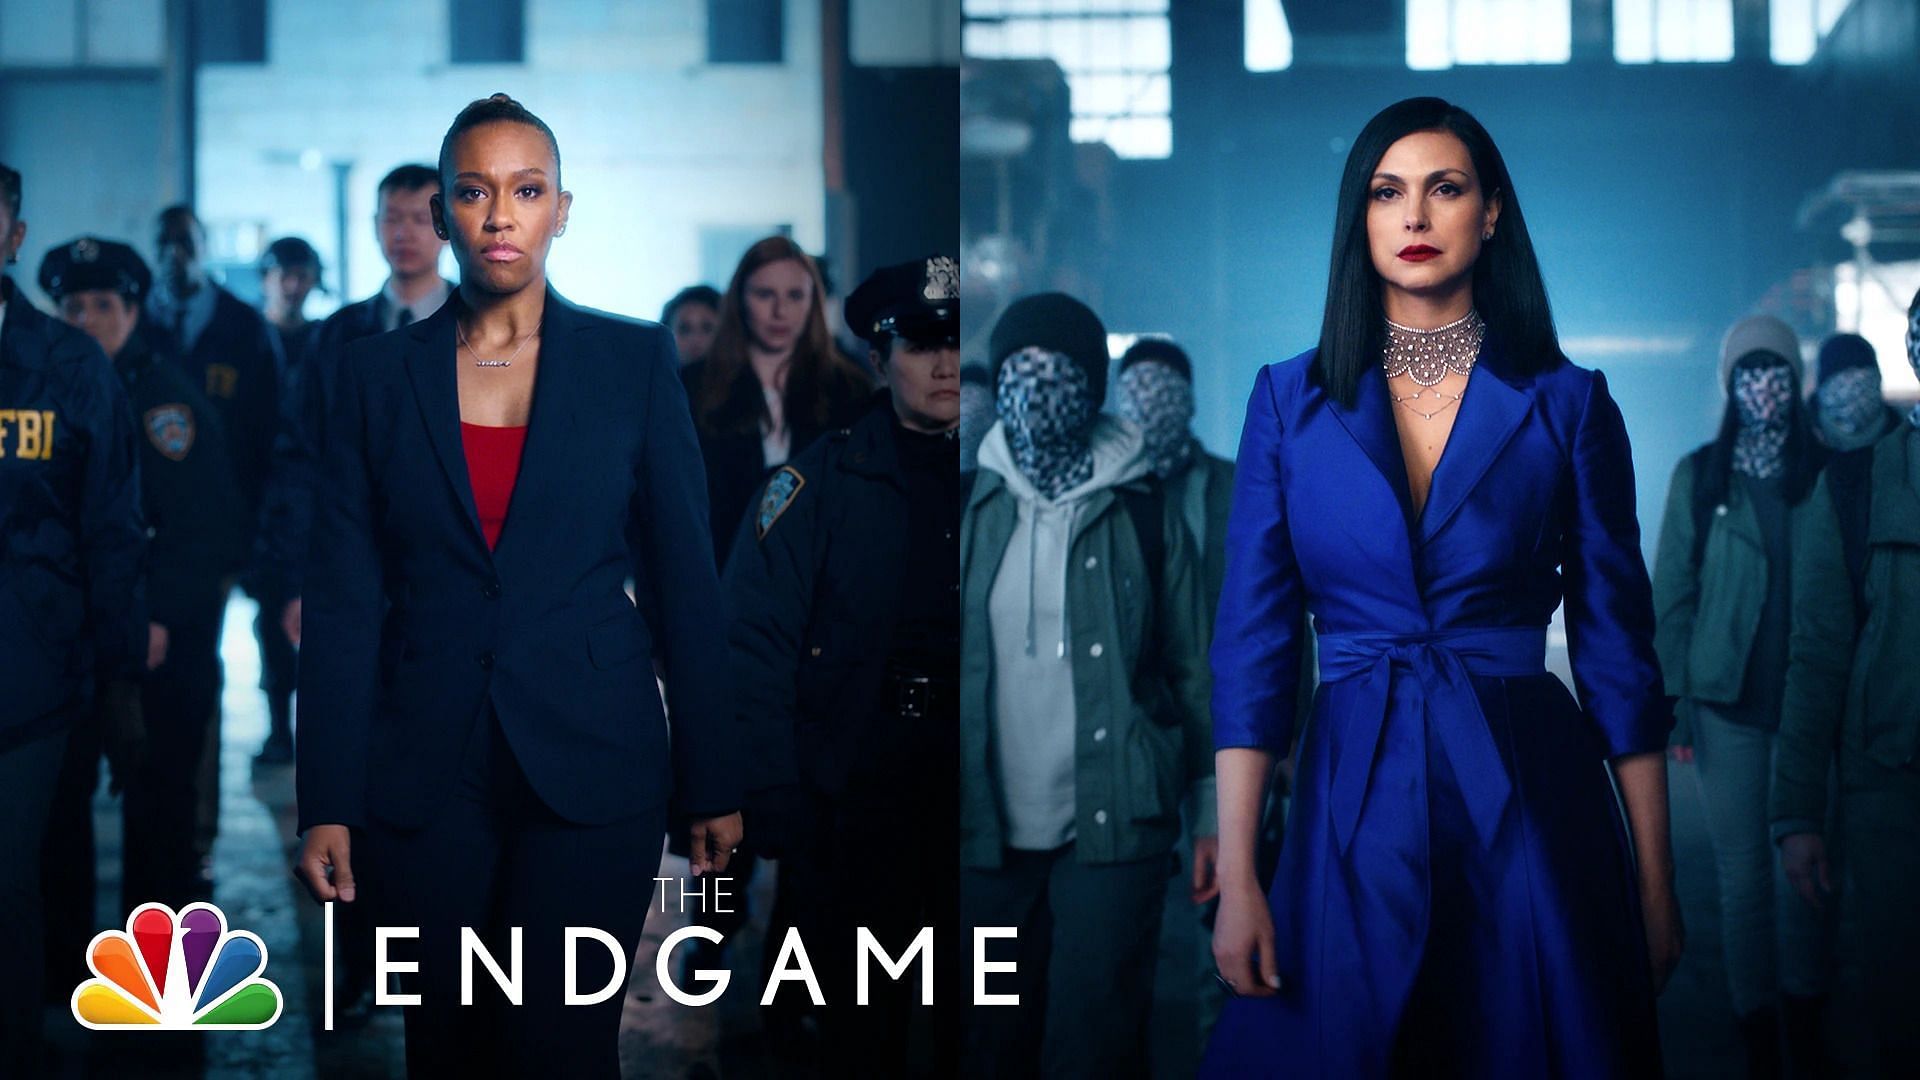 The Endgame season 1 episode 1 review: A familiar game and a one